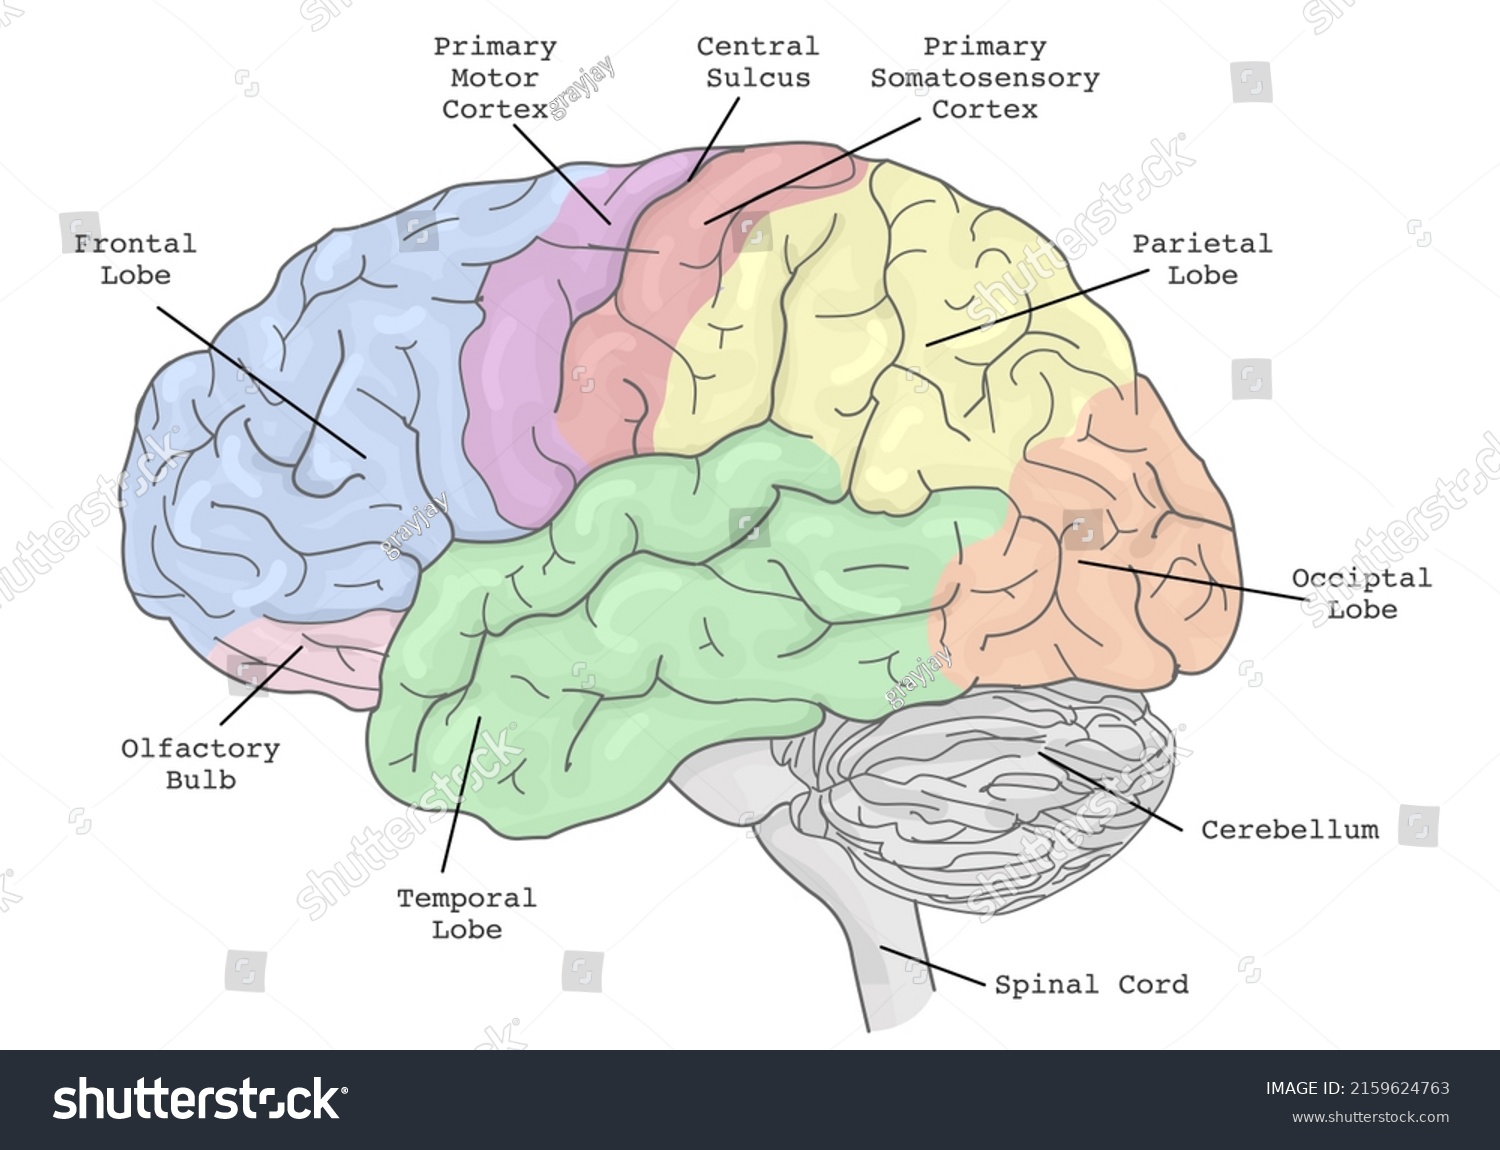 Brain Areas Parts Functions Regions Anatomy Stock Vector Royalty Free 2159624763 Shutterstock 5912